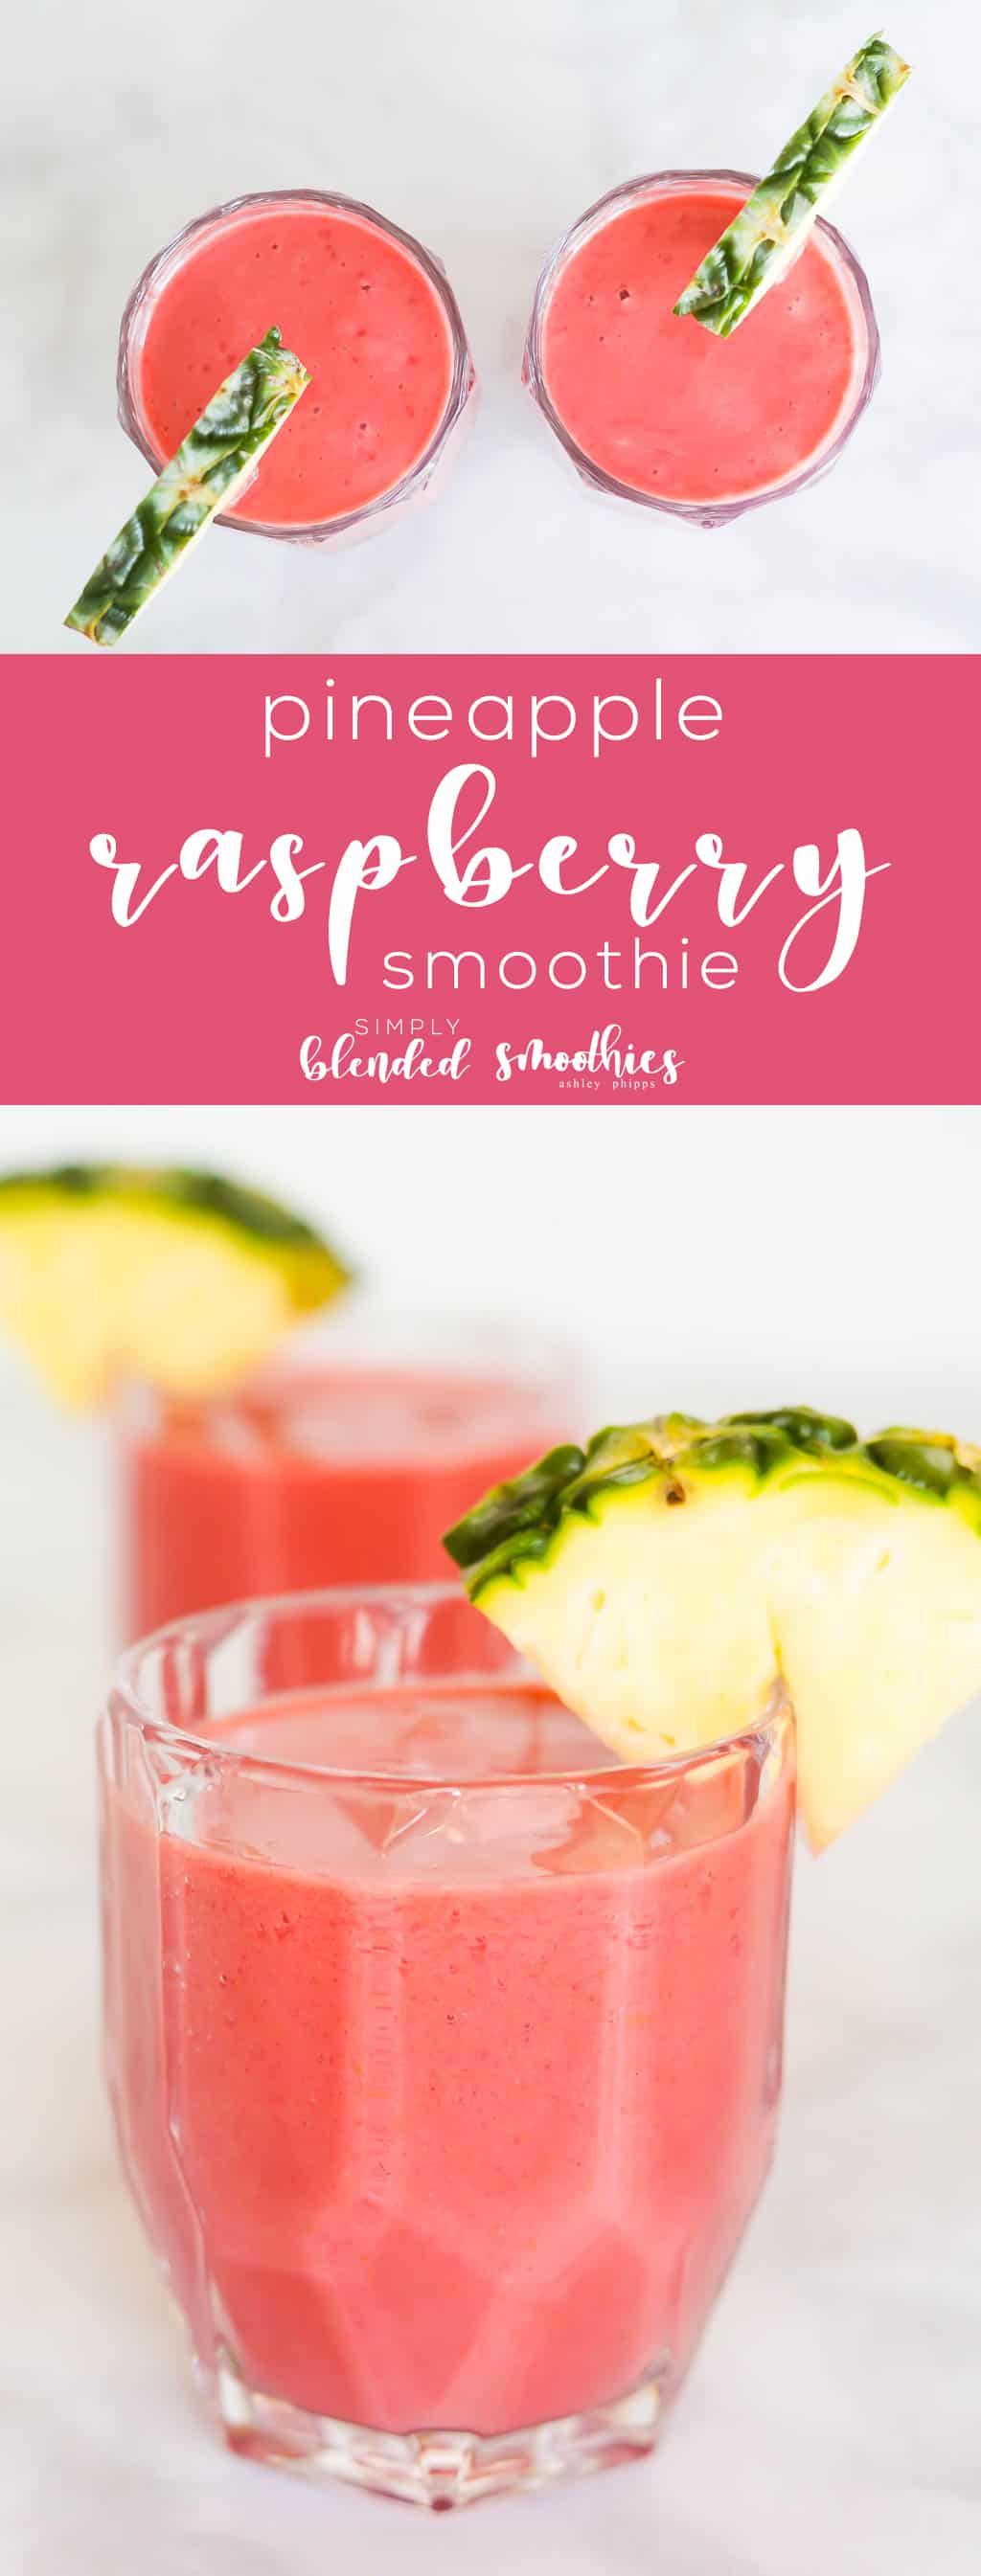 Pineapple Raspberry Smoothie Recipe - This 4 Ingredient Smoothie Is Full Of Flavor Is Healthy And Is A Great Way To Start Your Day